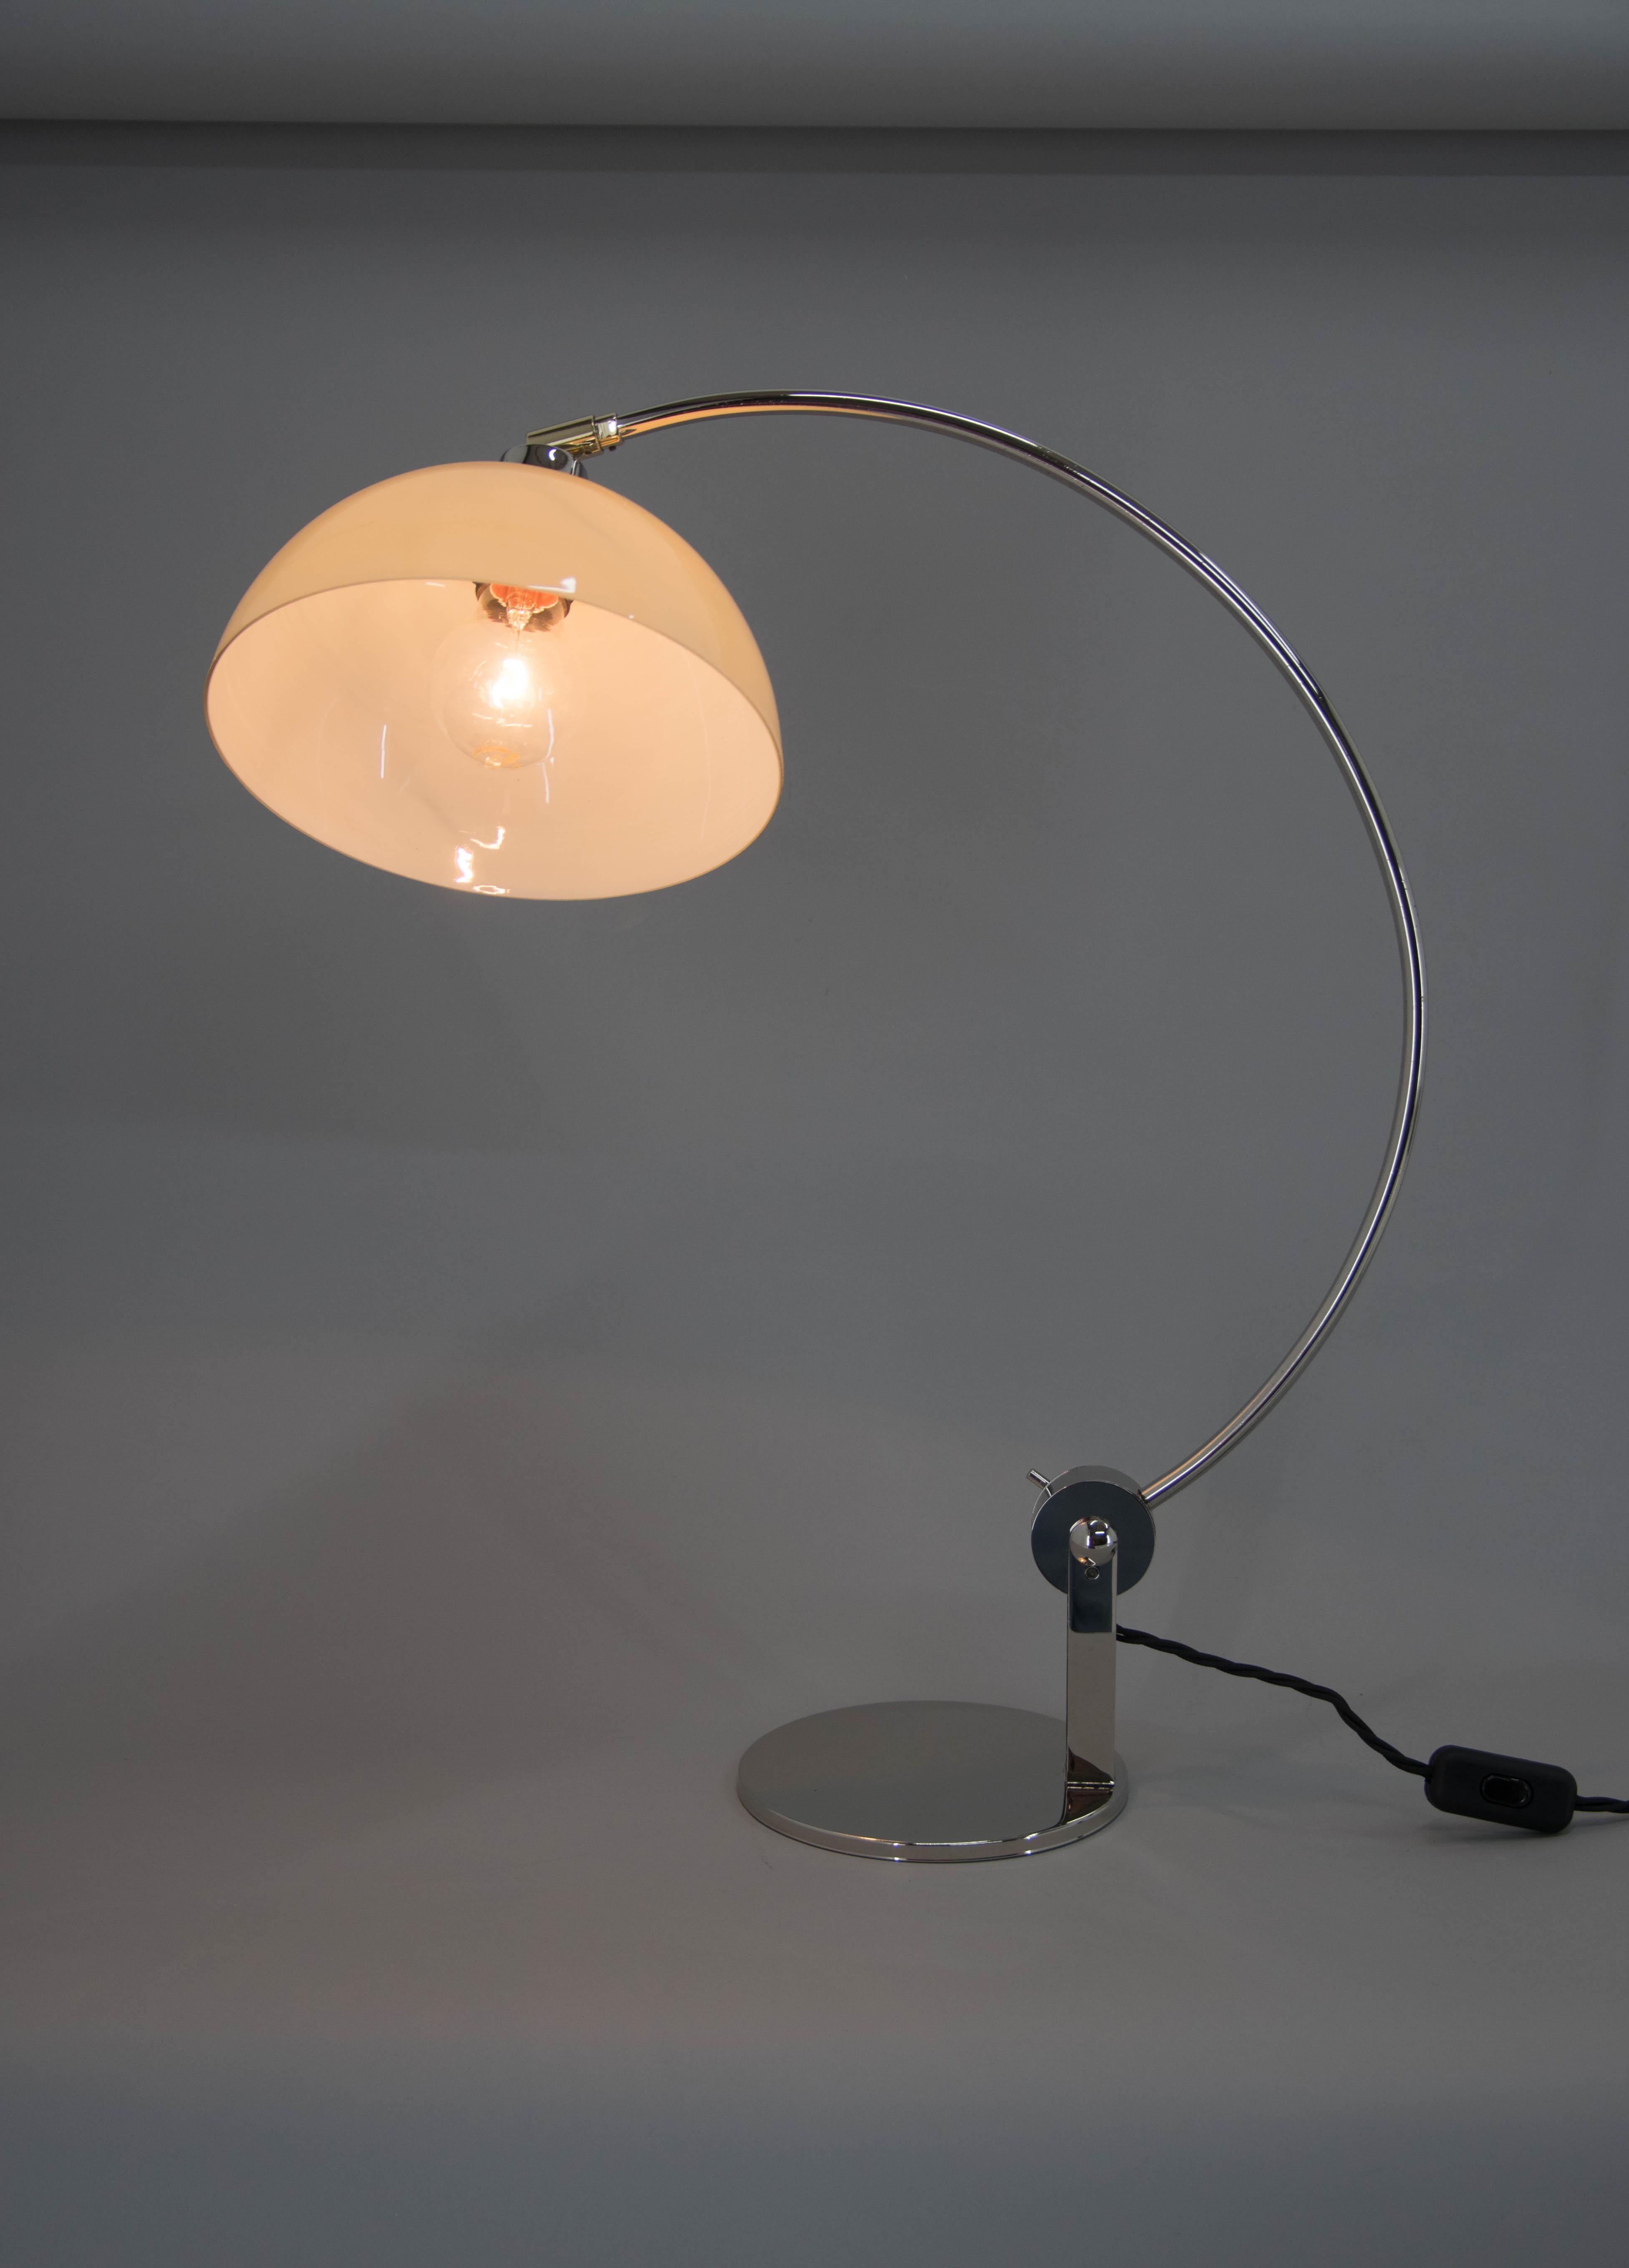 European Functionalist Table Lamp, Europe, 1950s, Excellent Condition For Sale